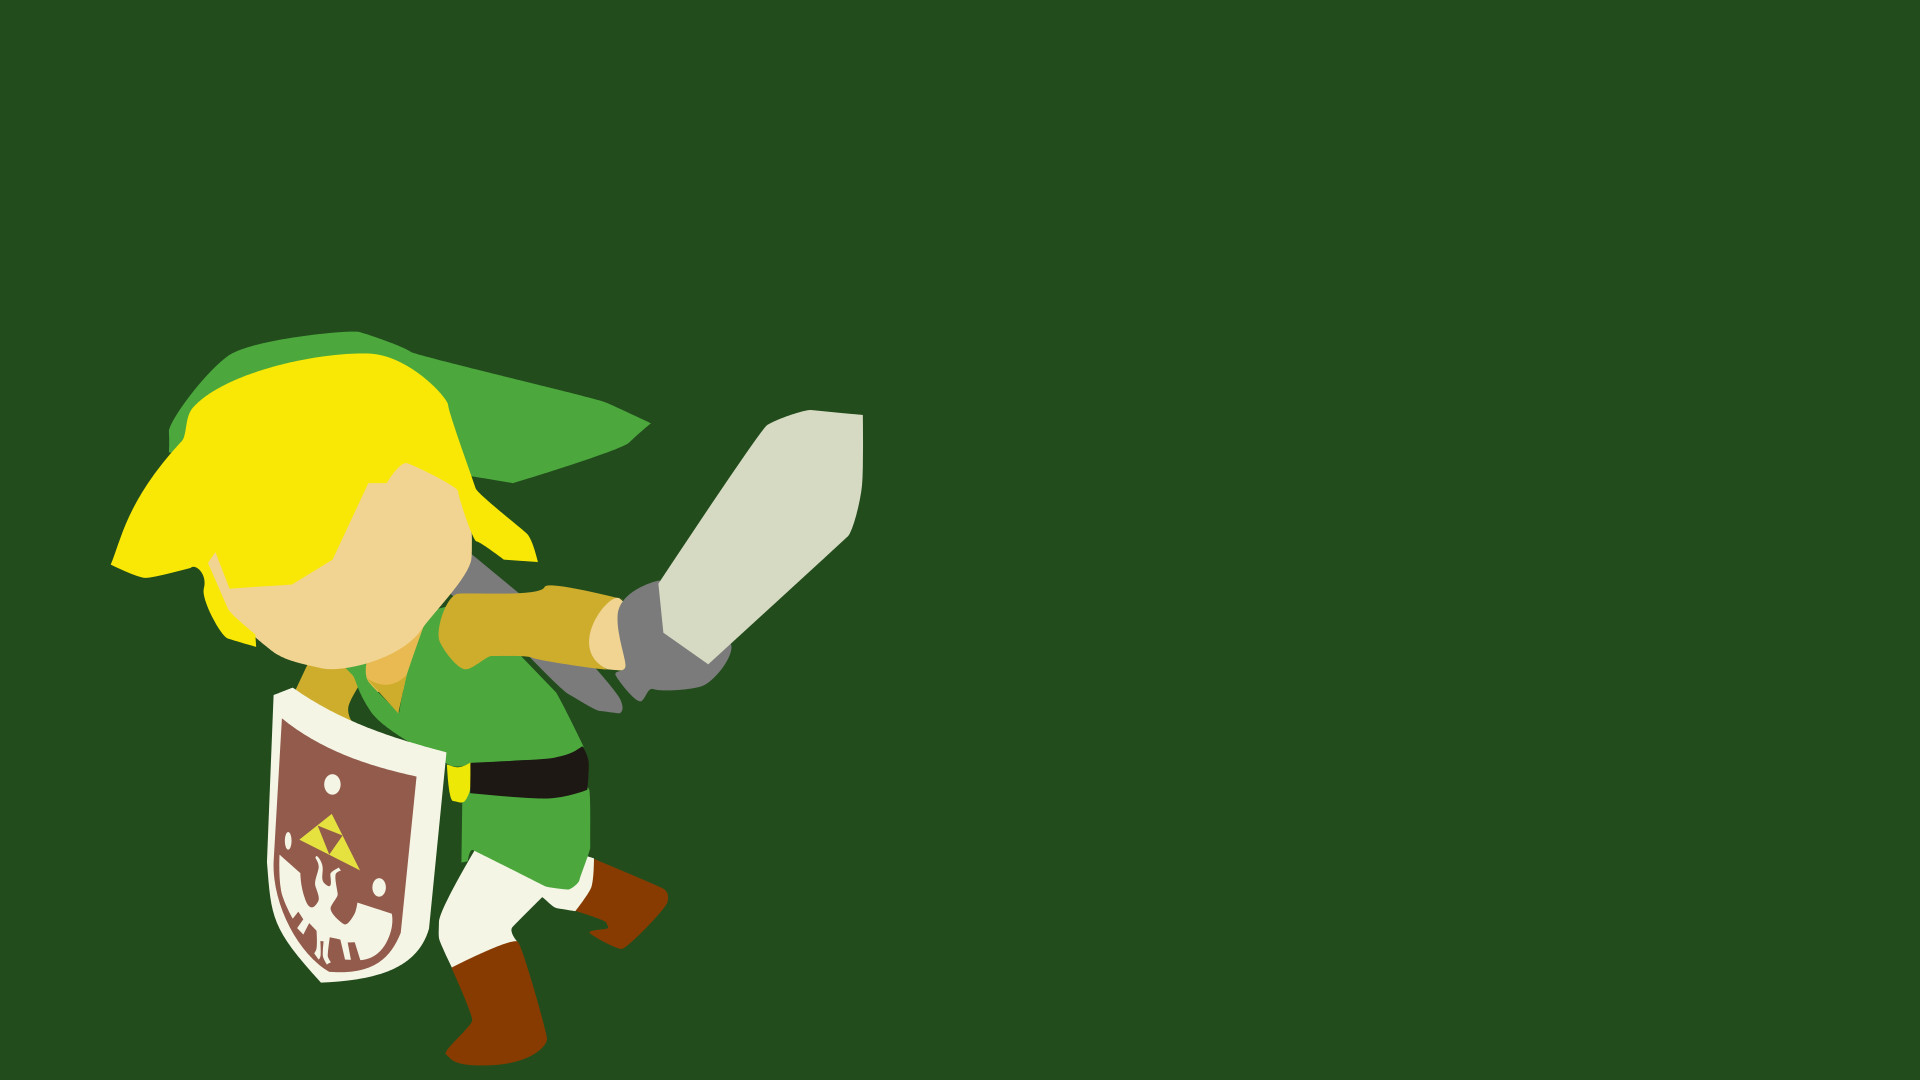 1920x1080 I posted a Minimalist Link Wallpaper here last night. A friend asked me to  do a Wind Waker Link, so I thought I'd share that as well.